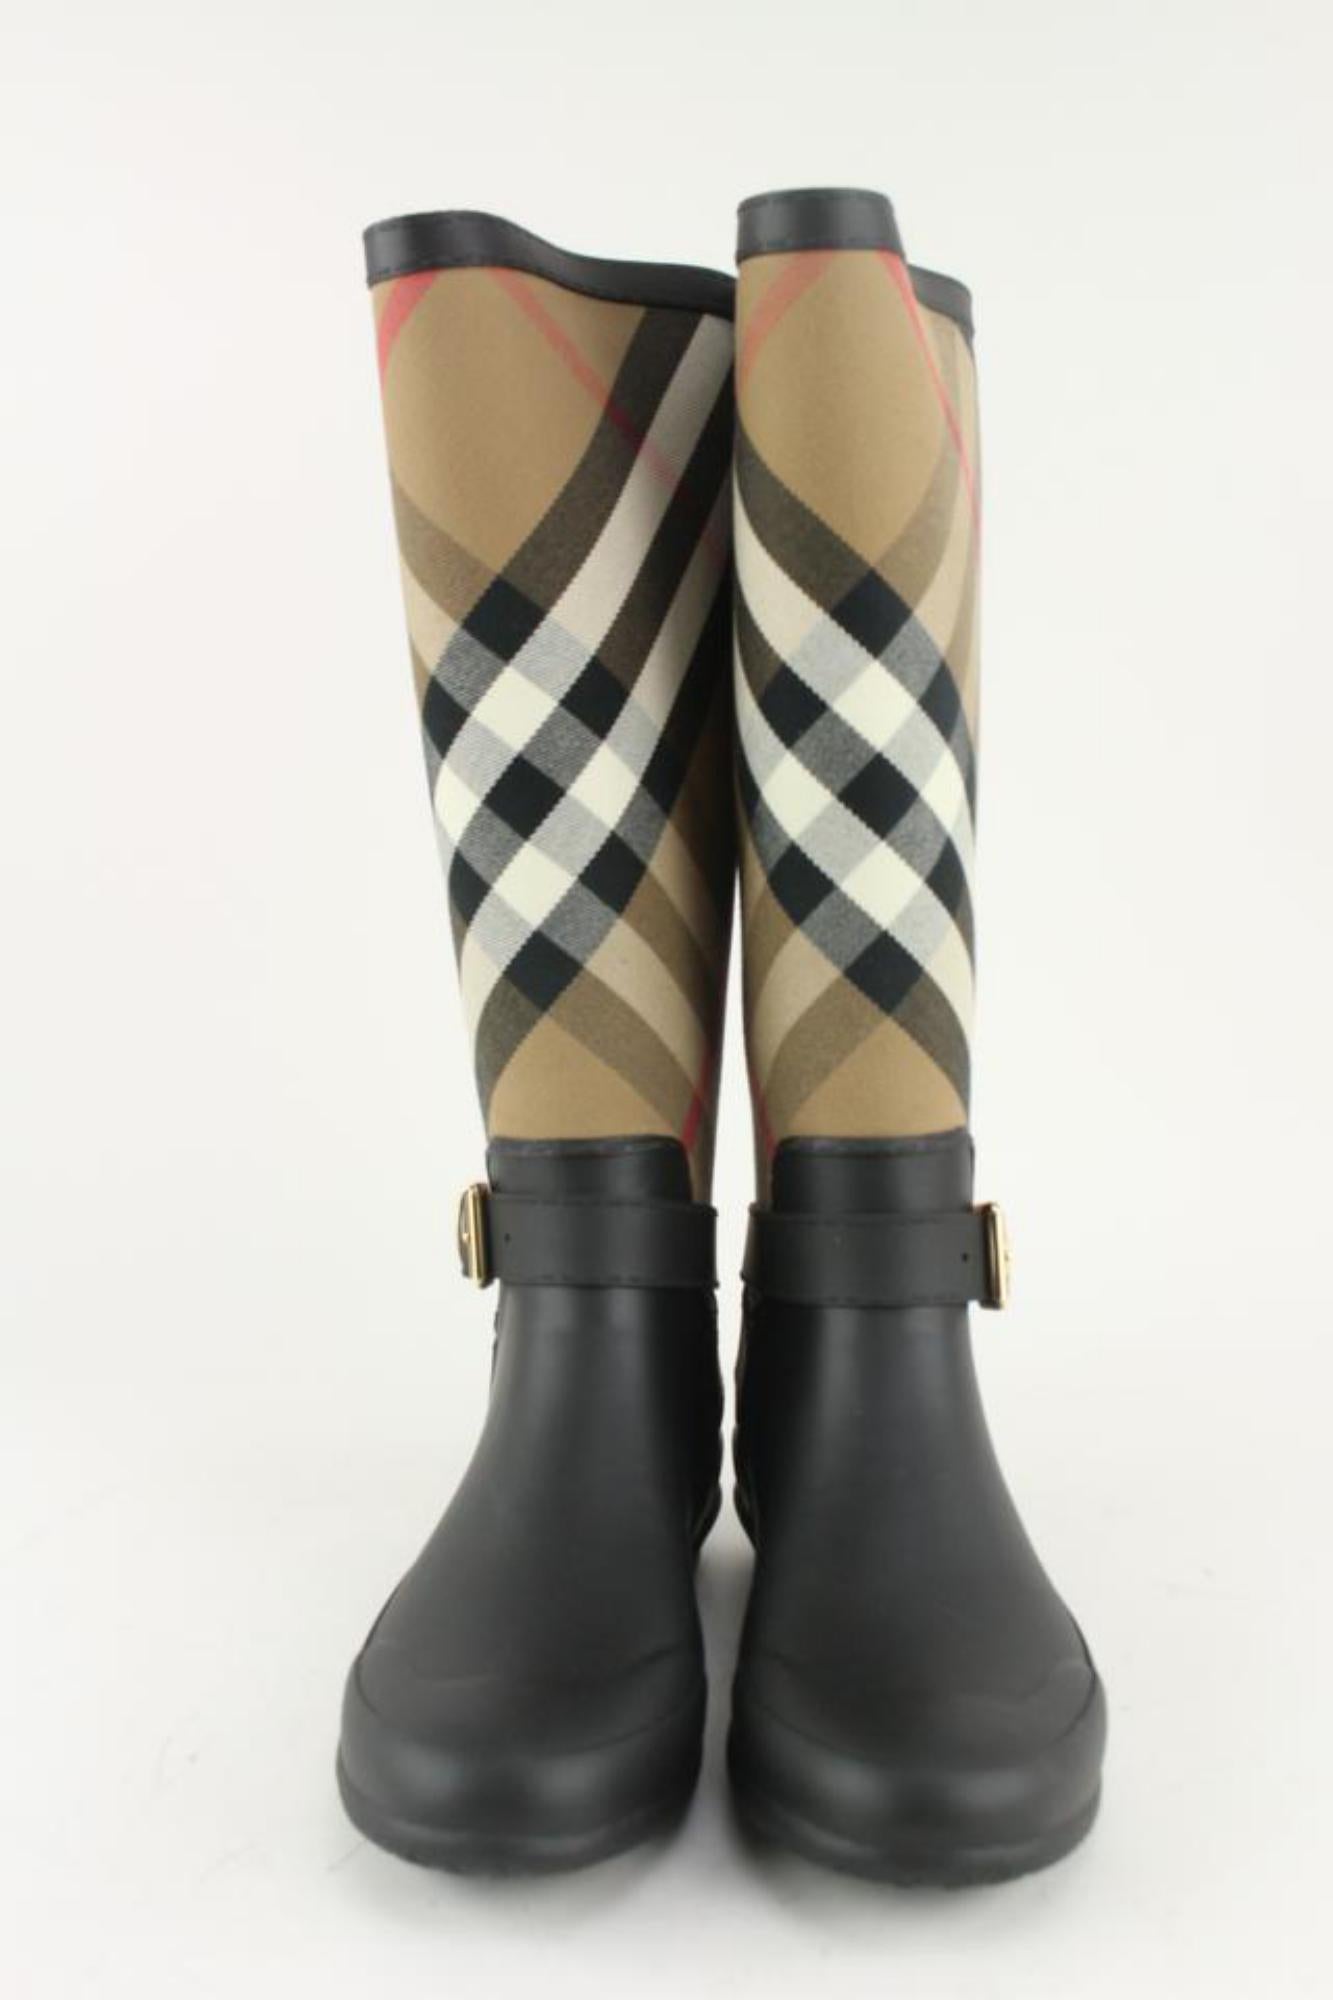 Burberry London 37 Beige Nova BlackStrap Detail House Check Rubber Rain Boot 1216bur13
Date Code/Serial Number: CNWUHFEN5WUH
Made In: China
Measurements: Length:  10.5